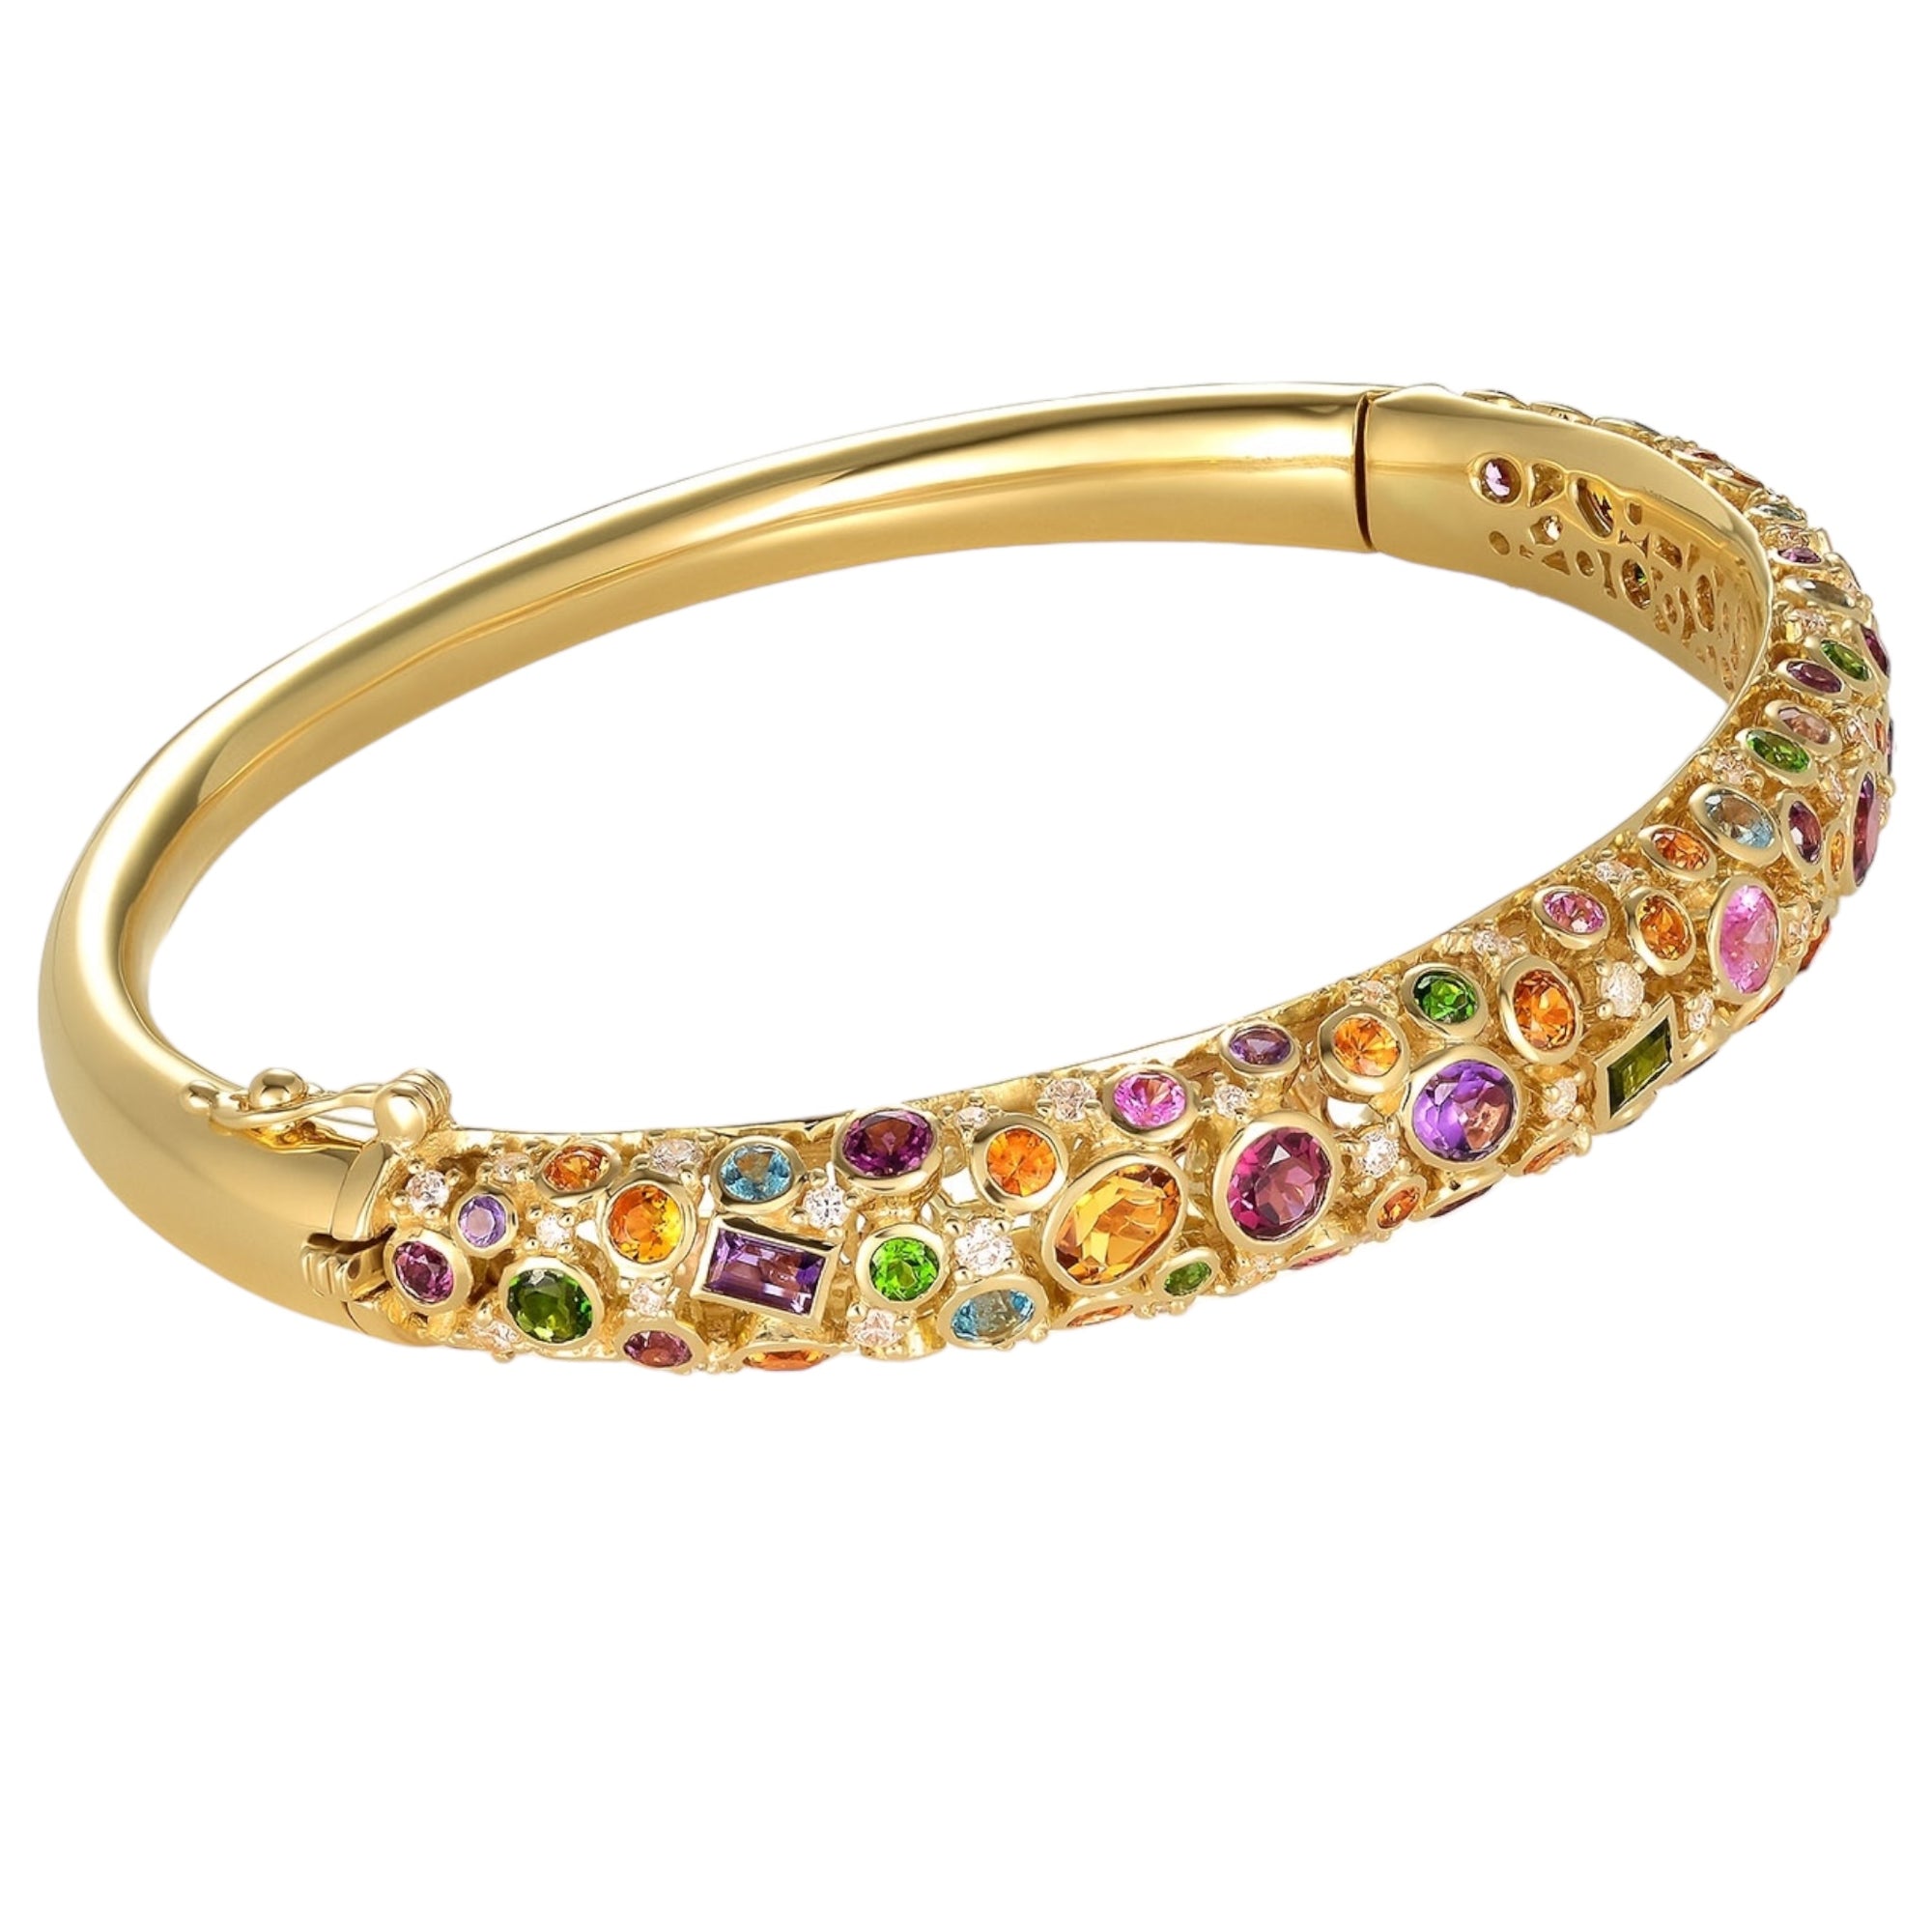 Supernova Bangle Bracelet by Martha Seely available at Talisman Collection Fine Jewelers in El Dorado Hills, CA and online. Stats: This outrageous bangle will instantly become the new favorite of your collection. Beautifully crafted in 18k gold with 48 tiny diamonds totaling 0.515 cts, and 90 multi-colored gemstones totaling 4.720 cts including blue topaz, citrine, pink and green tourmaline, amethyst, iolite, spessartite, yellow sapphires, and pink garnets.